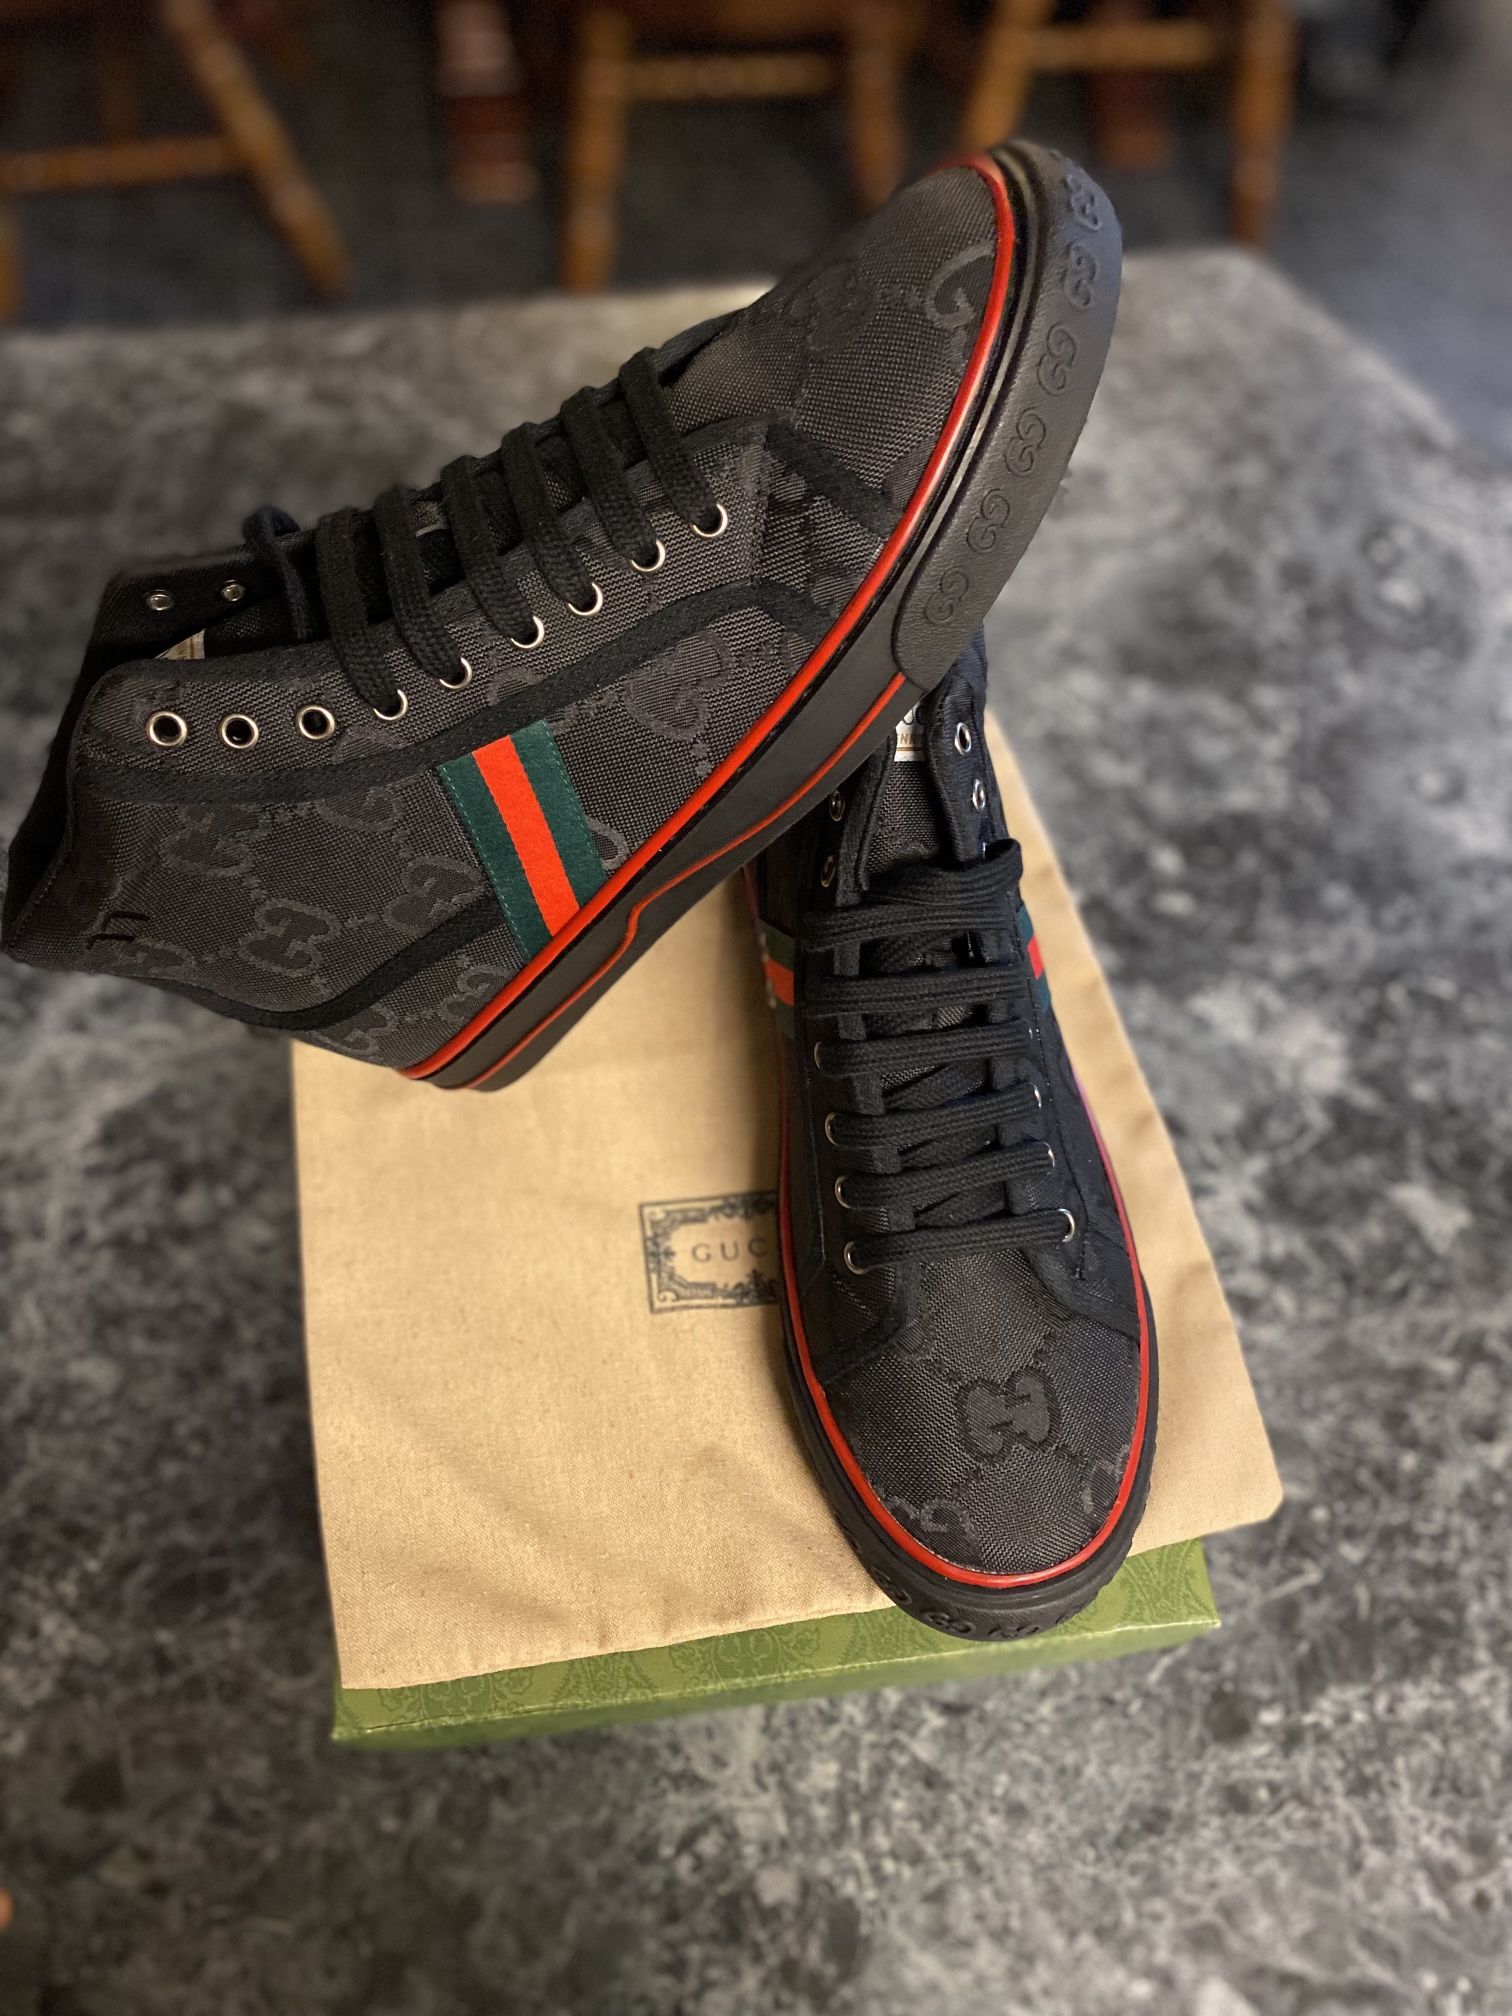 GUCCI SNEAKERS SIZE 10 